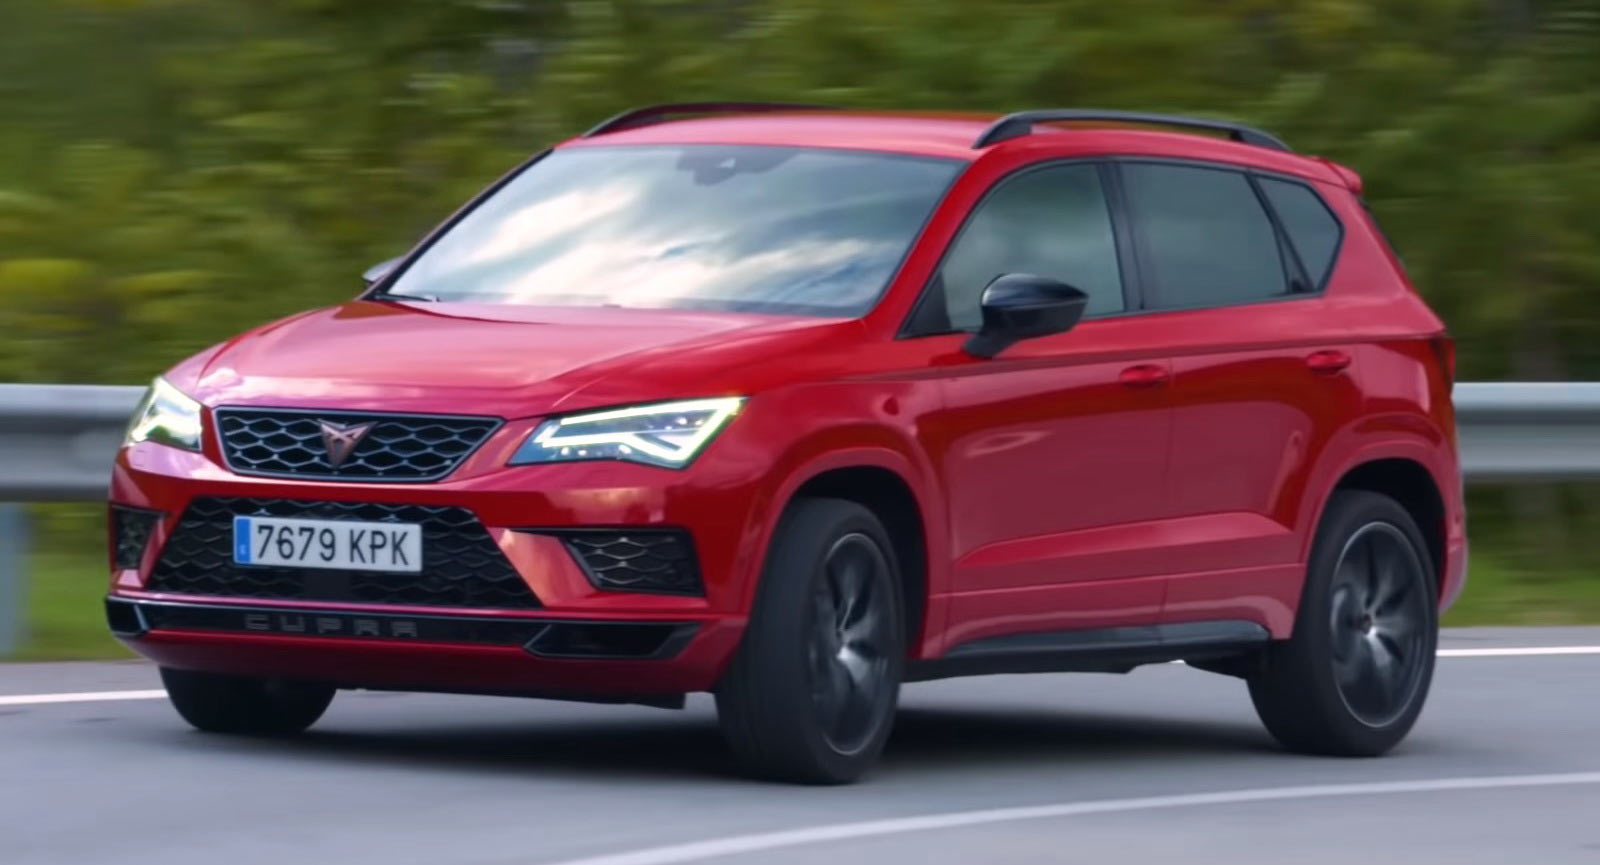 Can The Cupra Ateca Be Considered Cut-Price Porsche Macan? | Carscoops